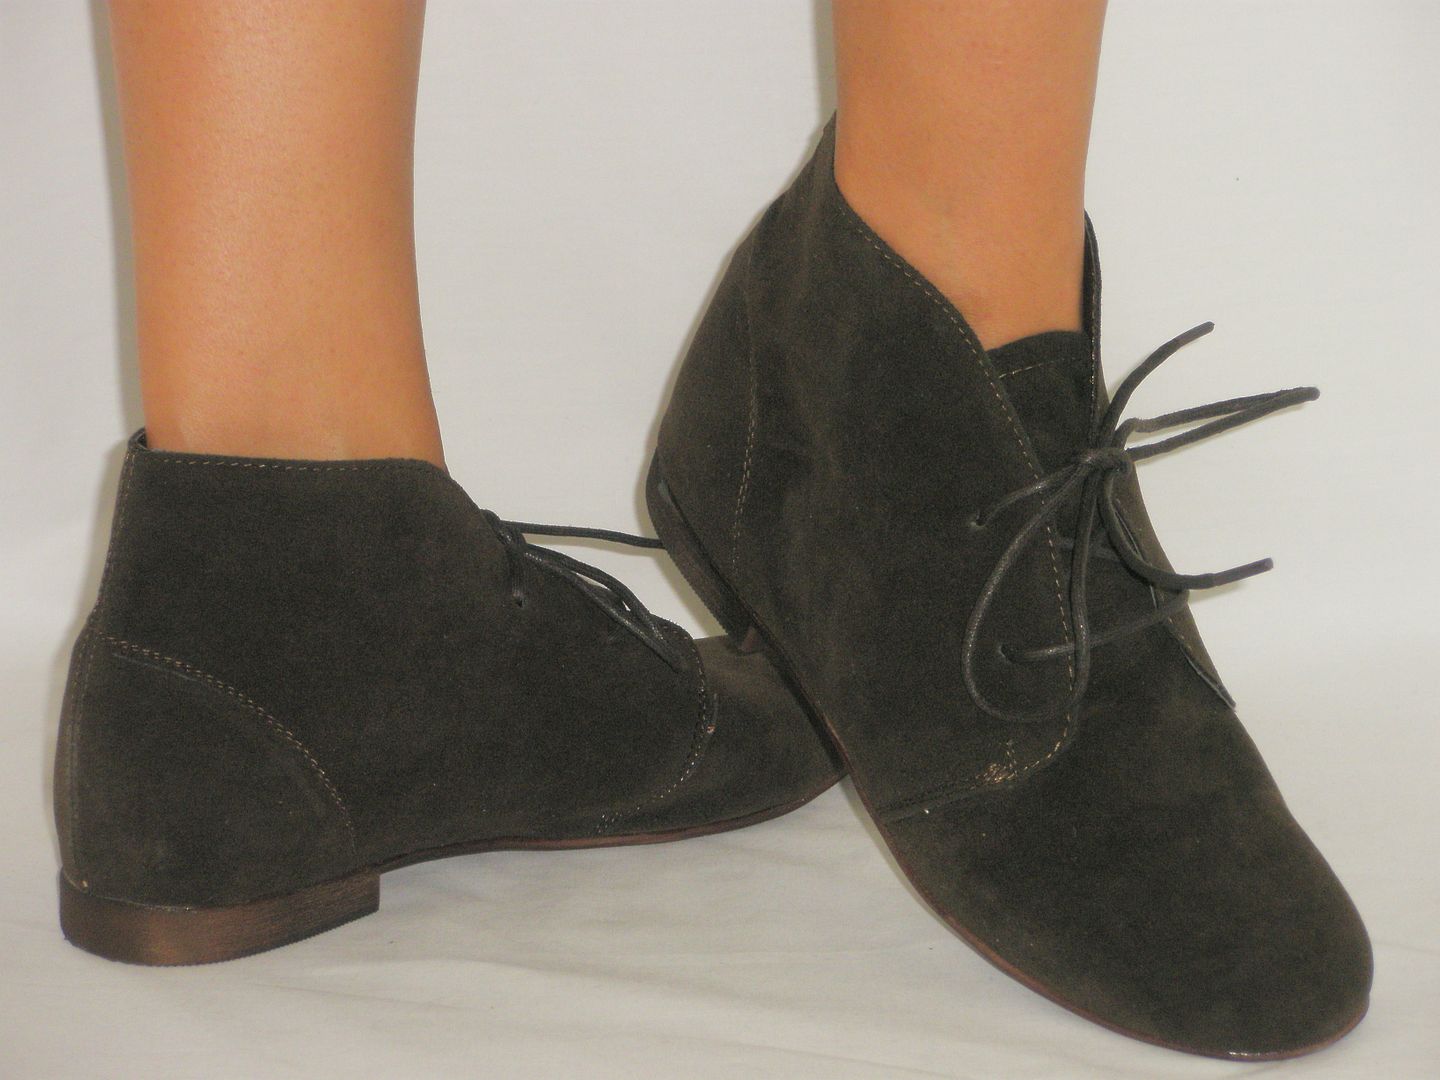 SoOo COMFY! HighTop Oxford Bootie Shoe Lace Up Ankle Boot *Faux Suede ...